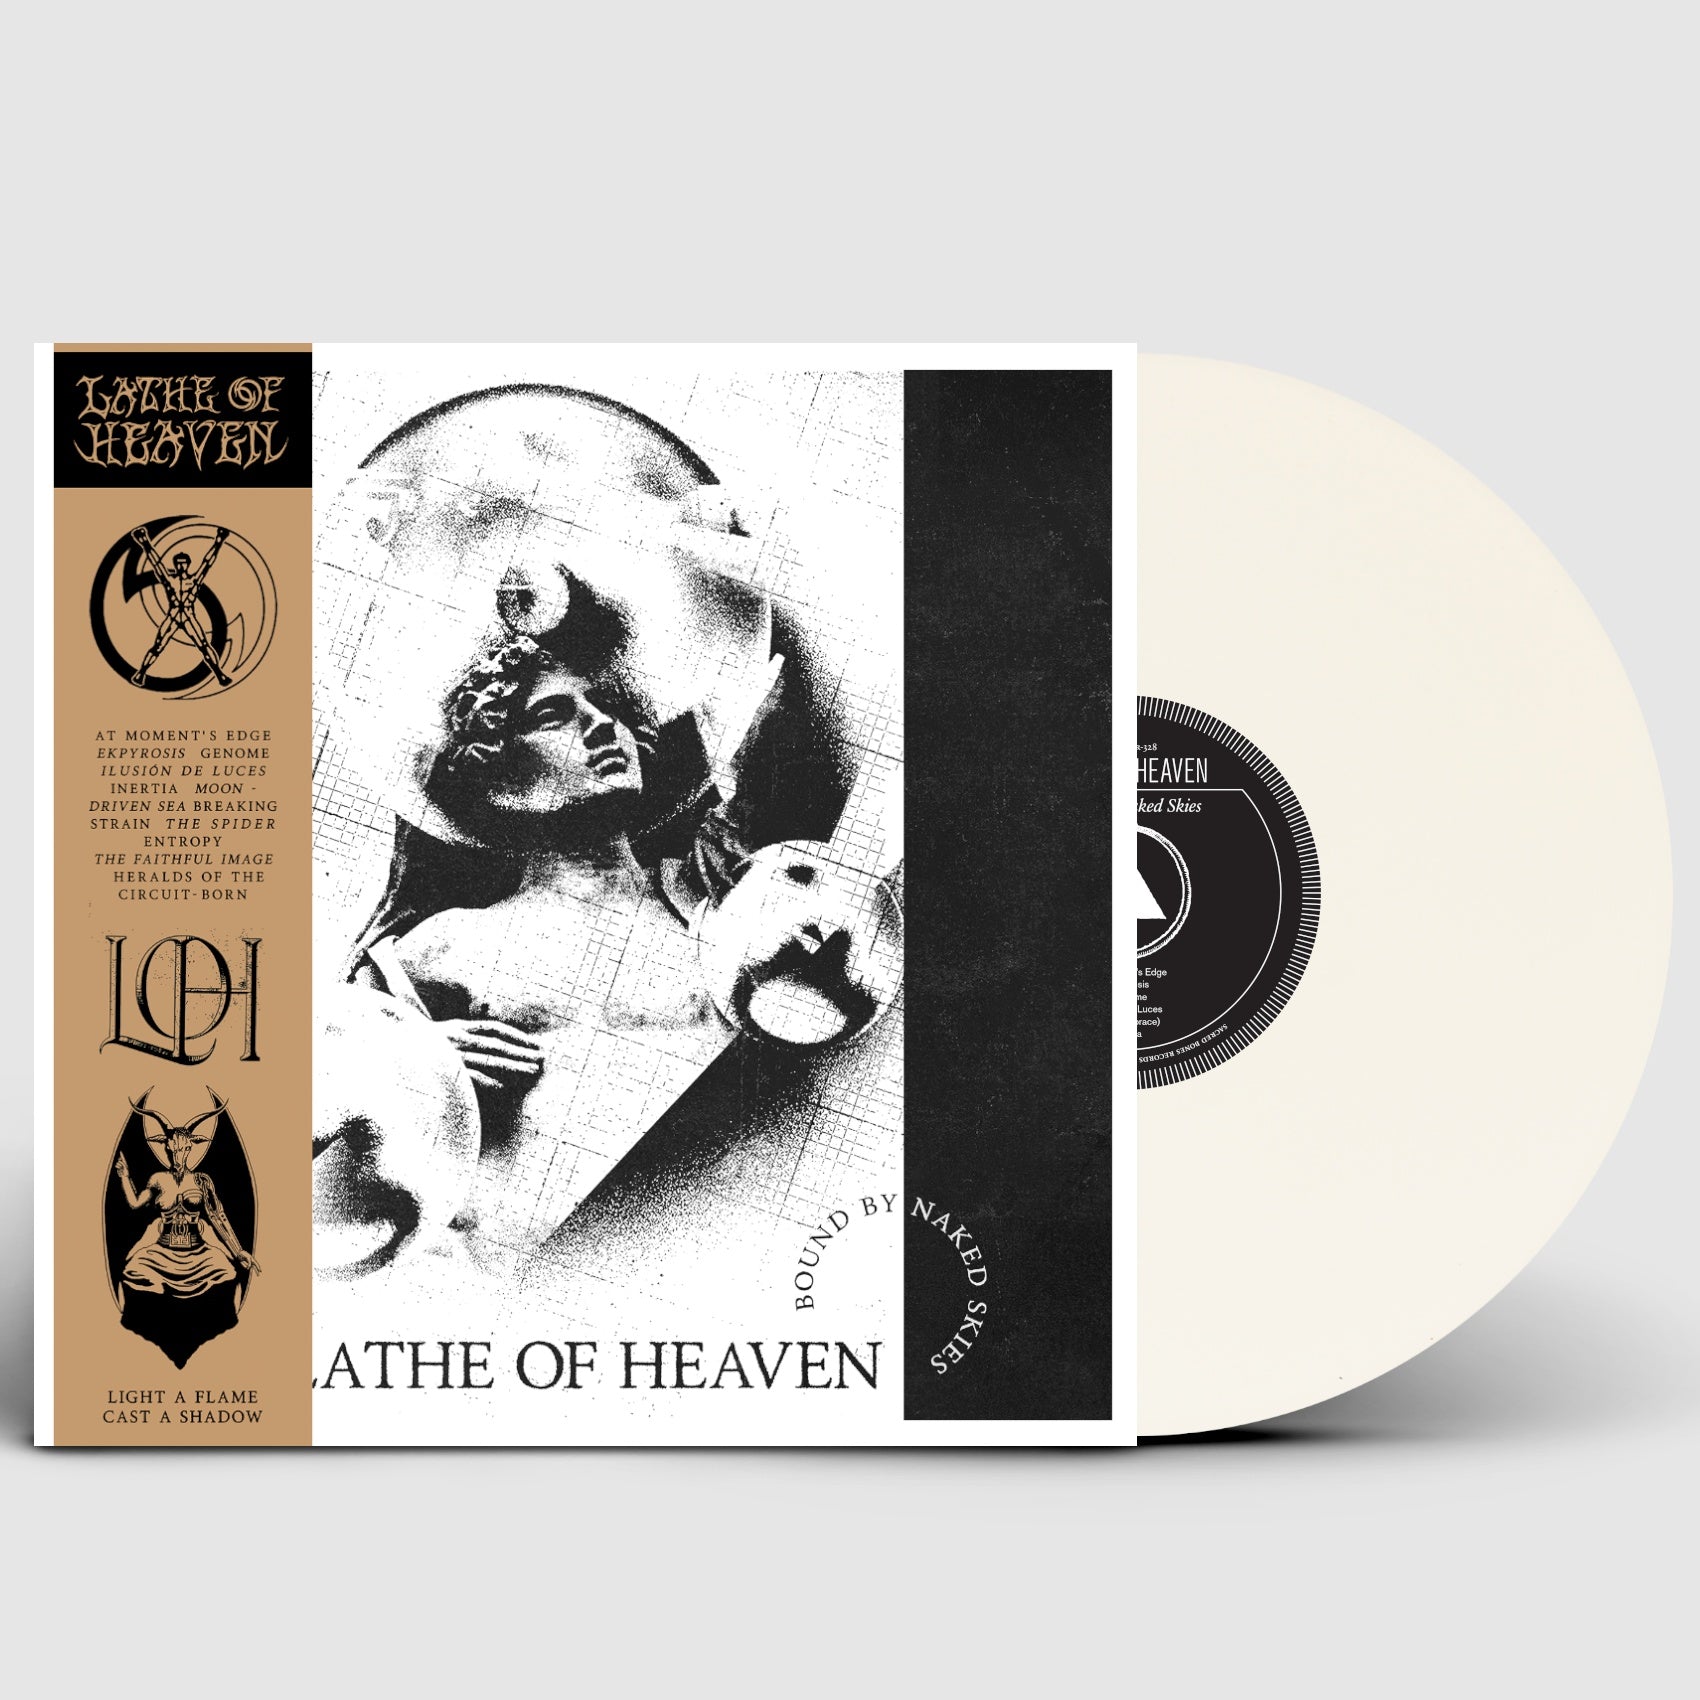 Lathe Of Heaven - Bound By Naked Skies: Limited Edition White Vinyl LP